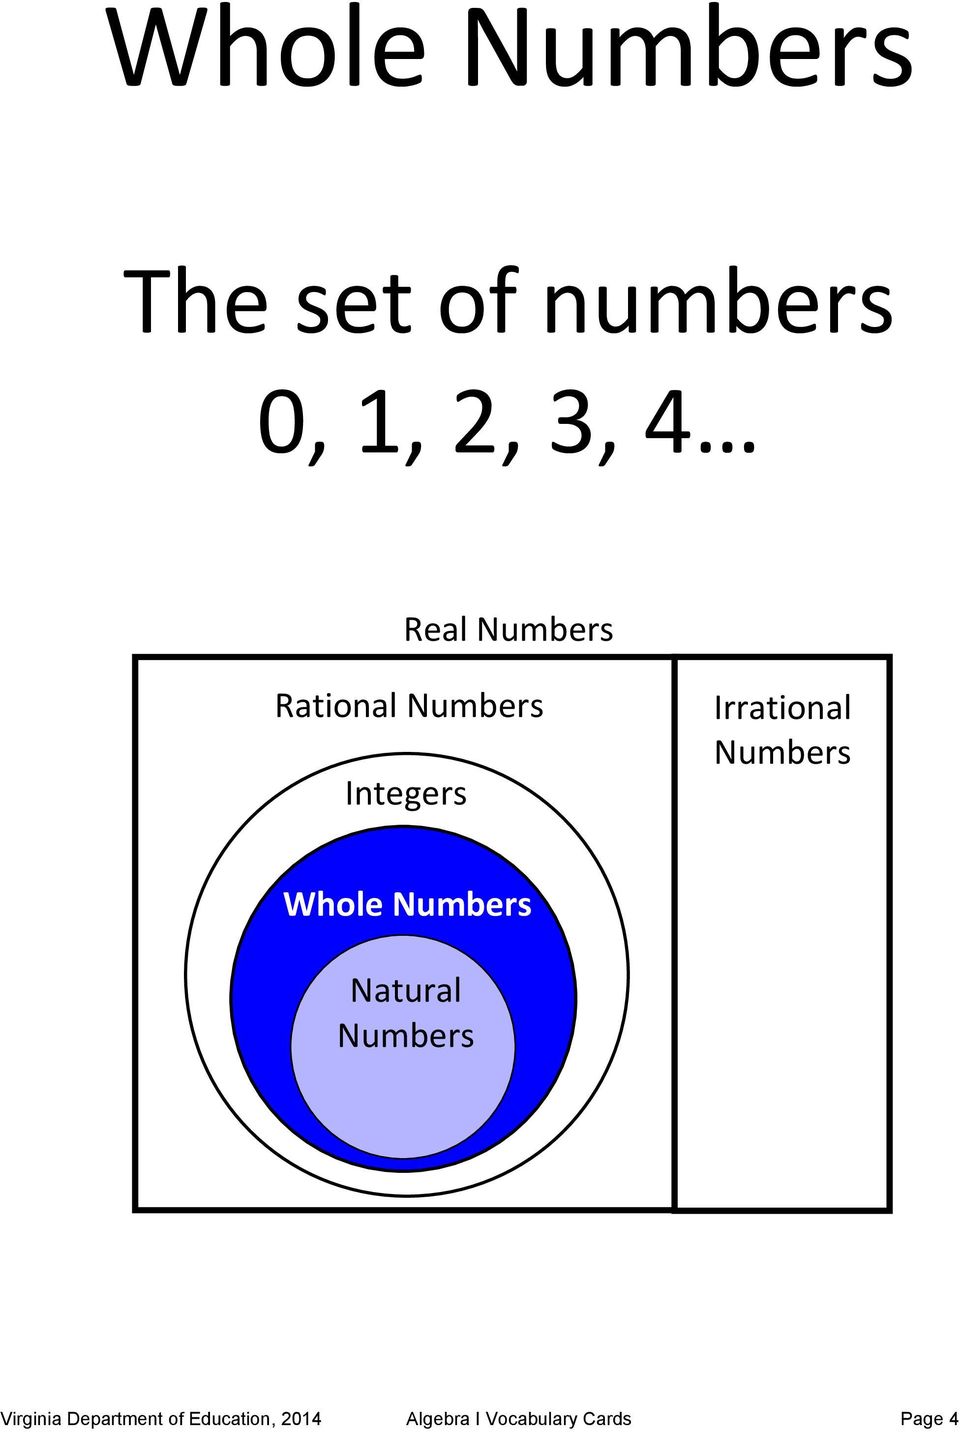 Irrational Numbers Whole Numbers Whole Numbers Natural Numbers